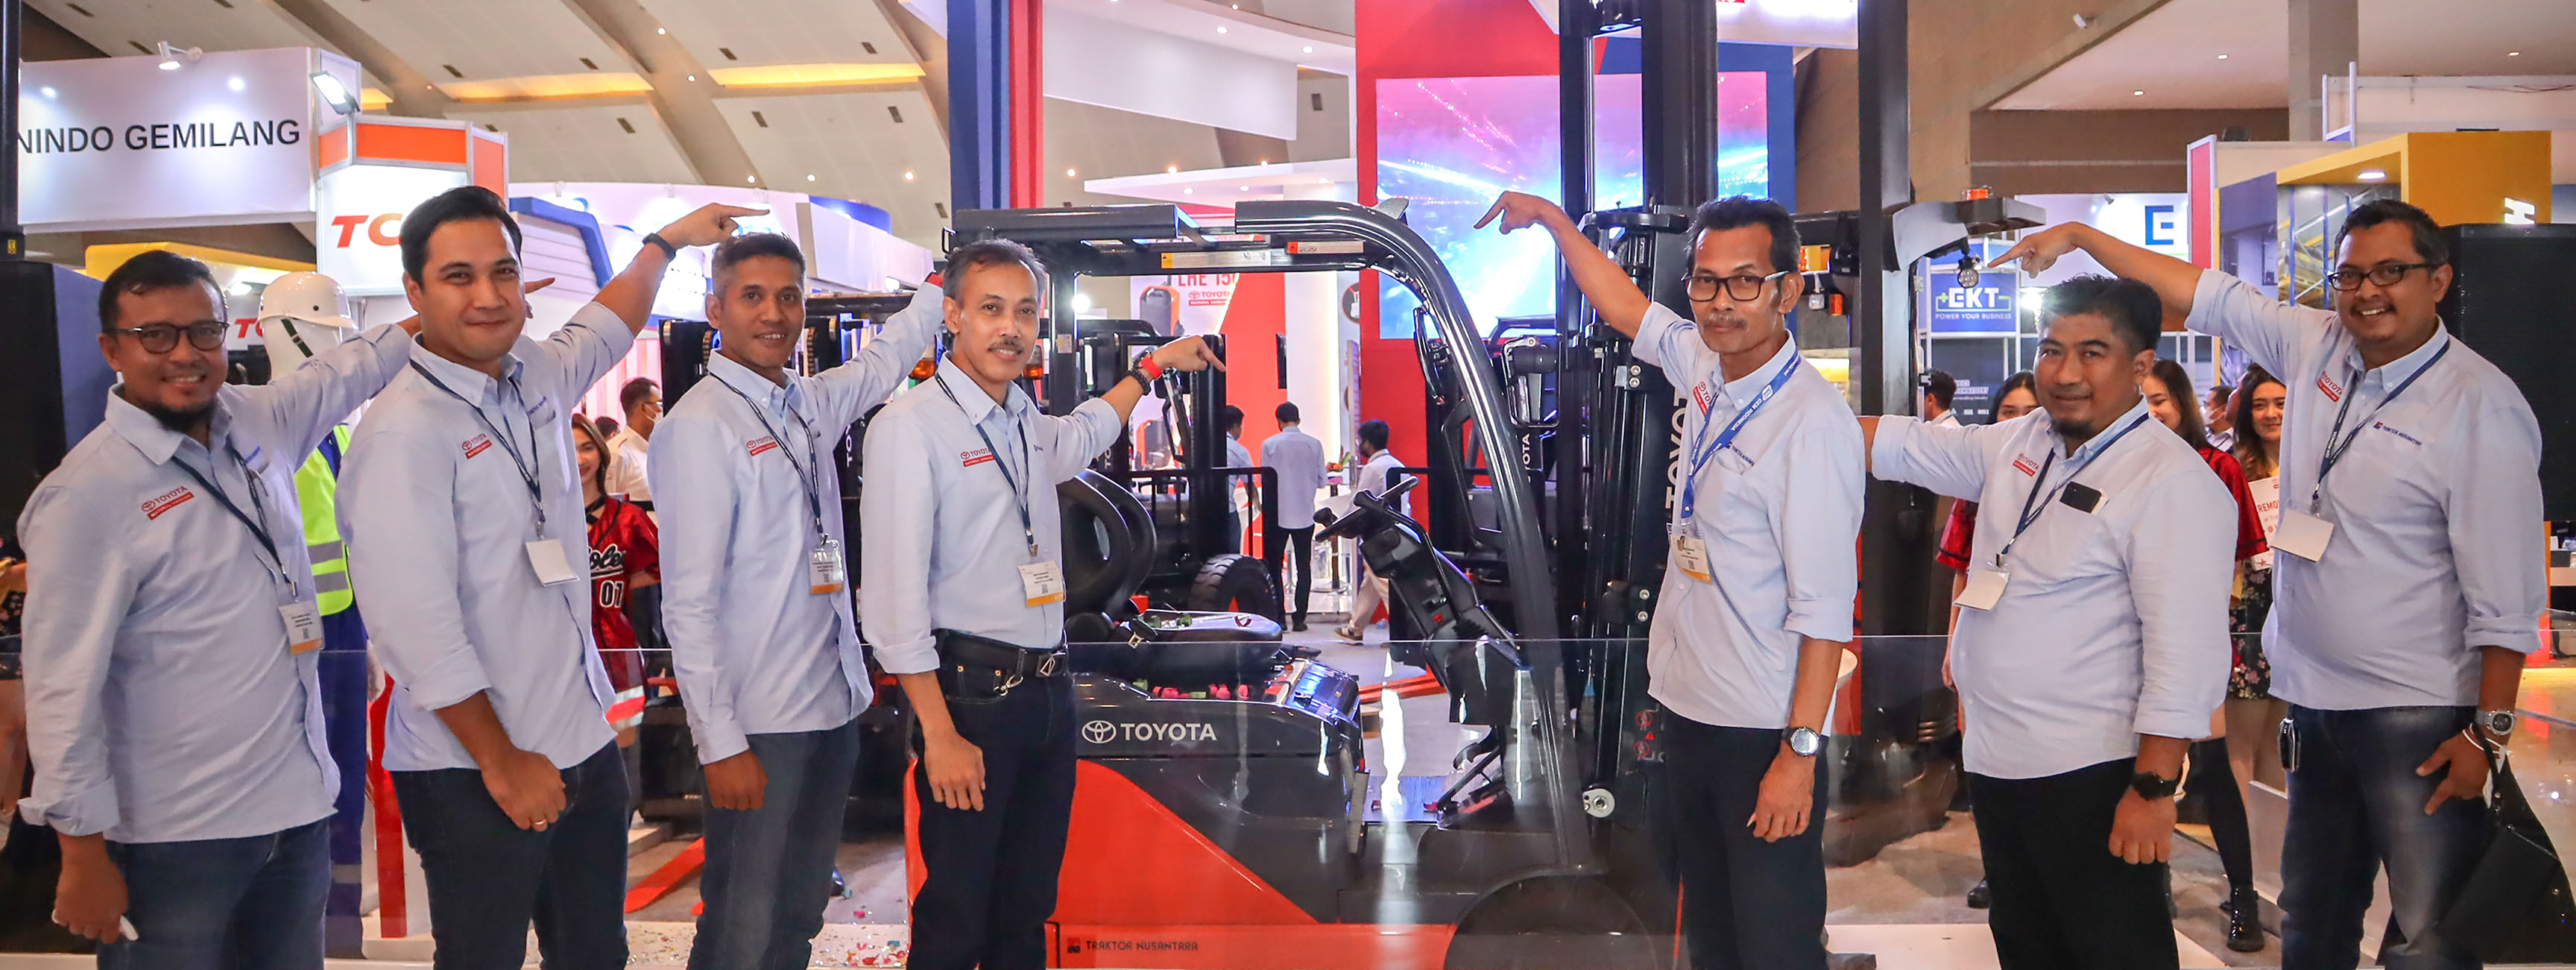 Forklift expo 02